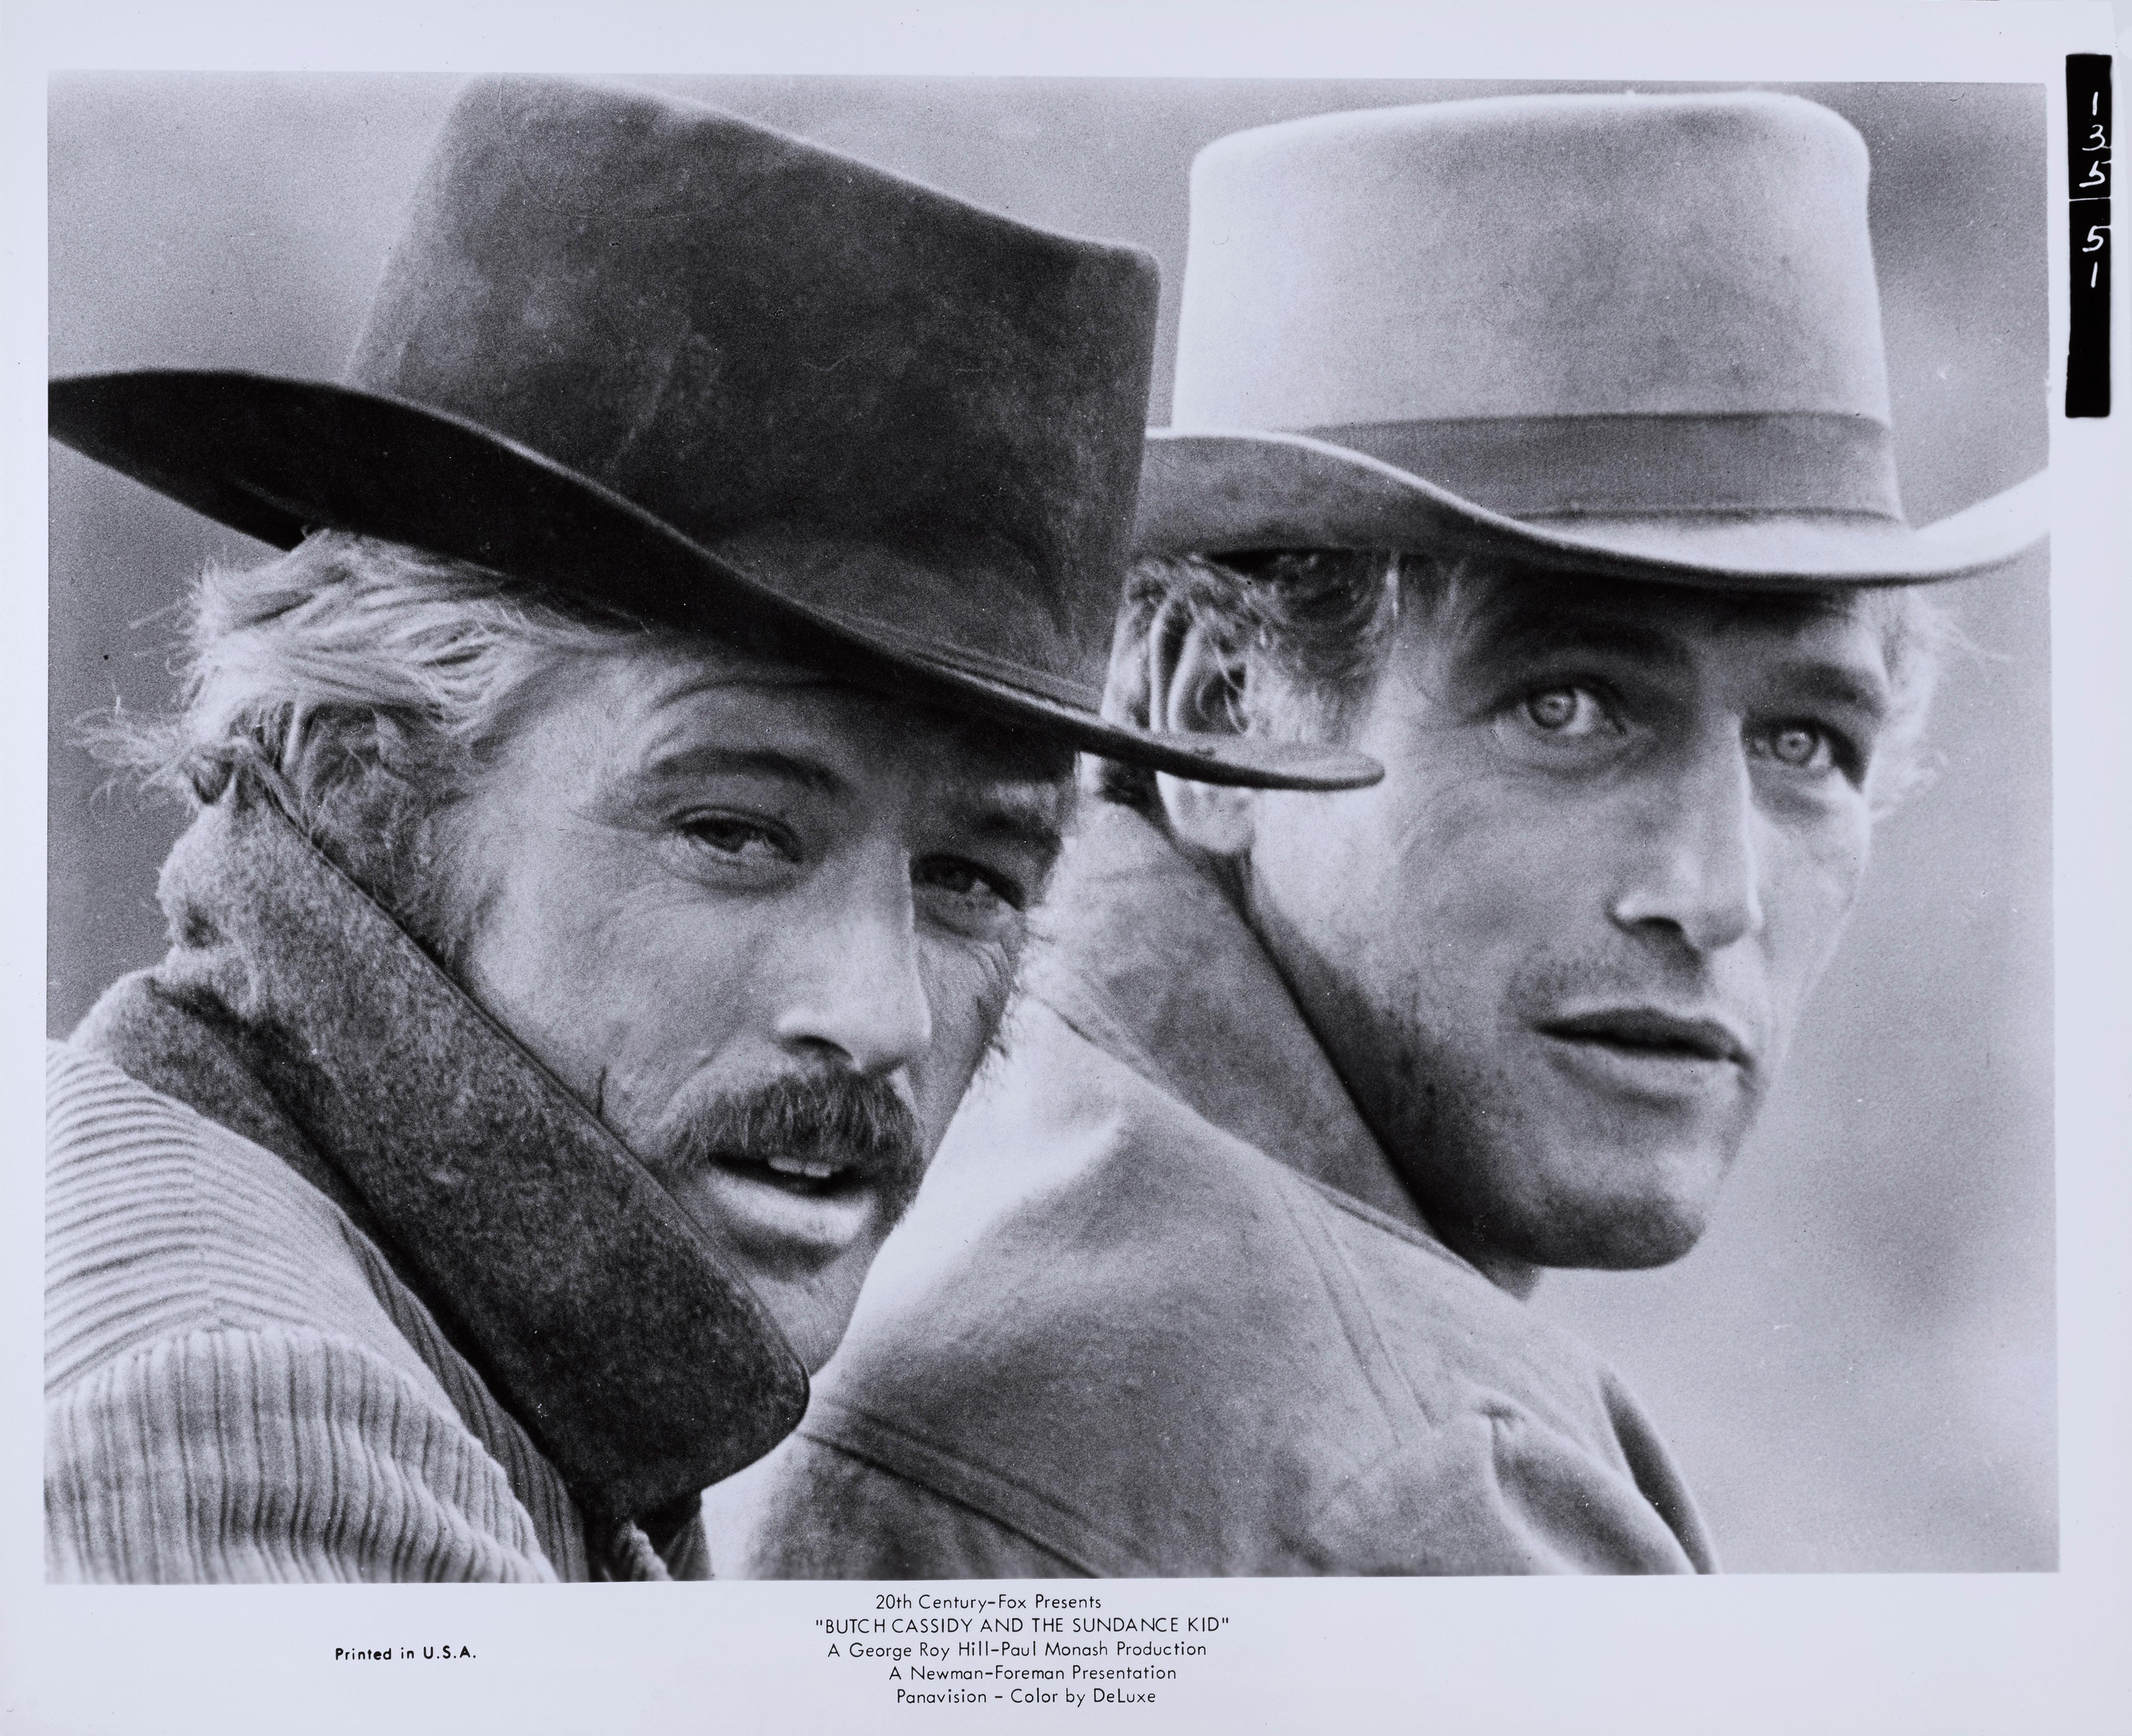 Original production still for the 1969 classic western staring Paul Newman, Robert Redford, Katherine Ross.
This piece will be packed in strong card and sent out flat.